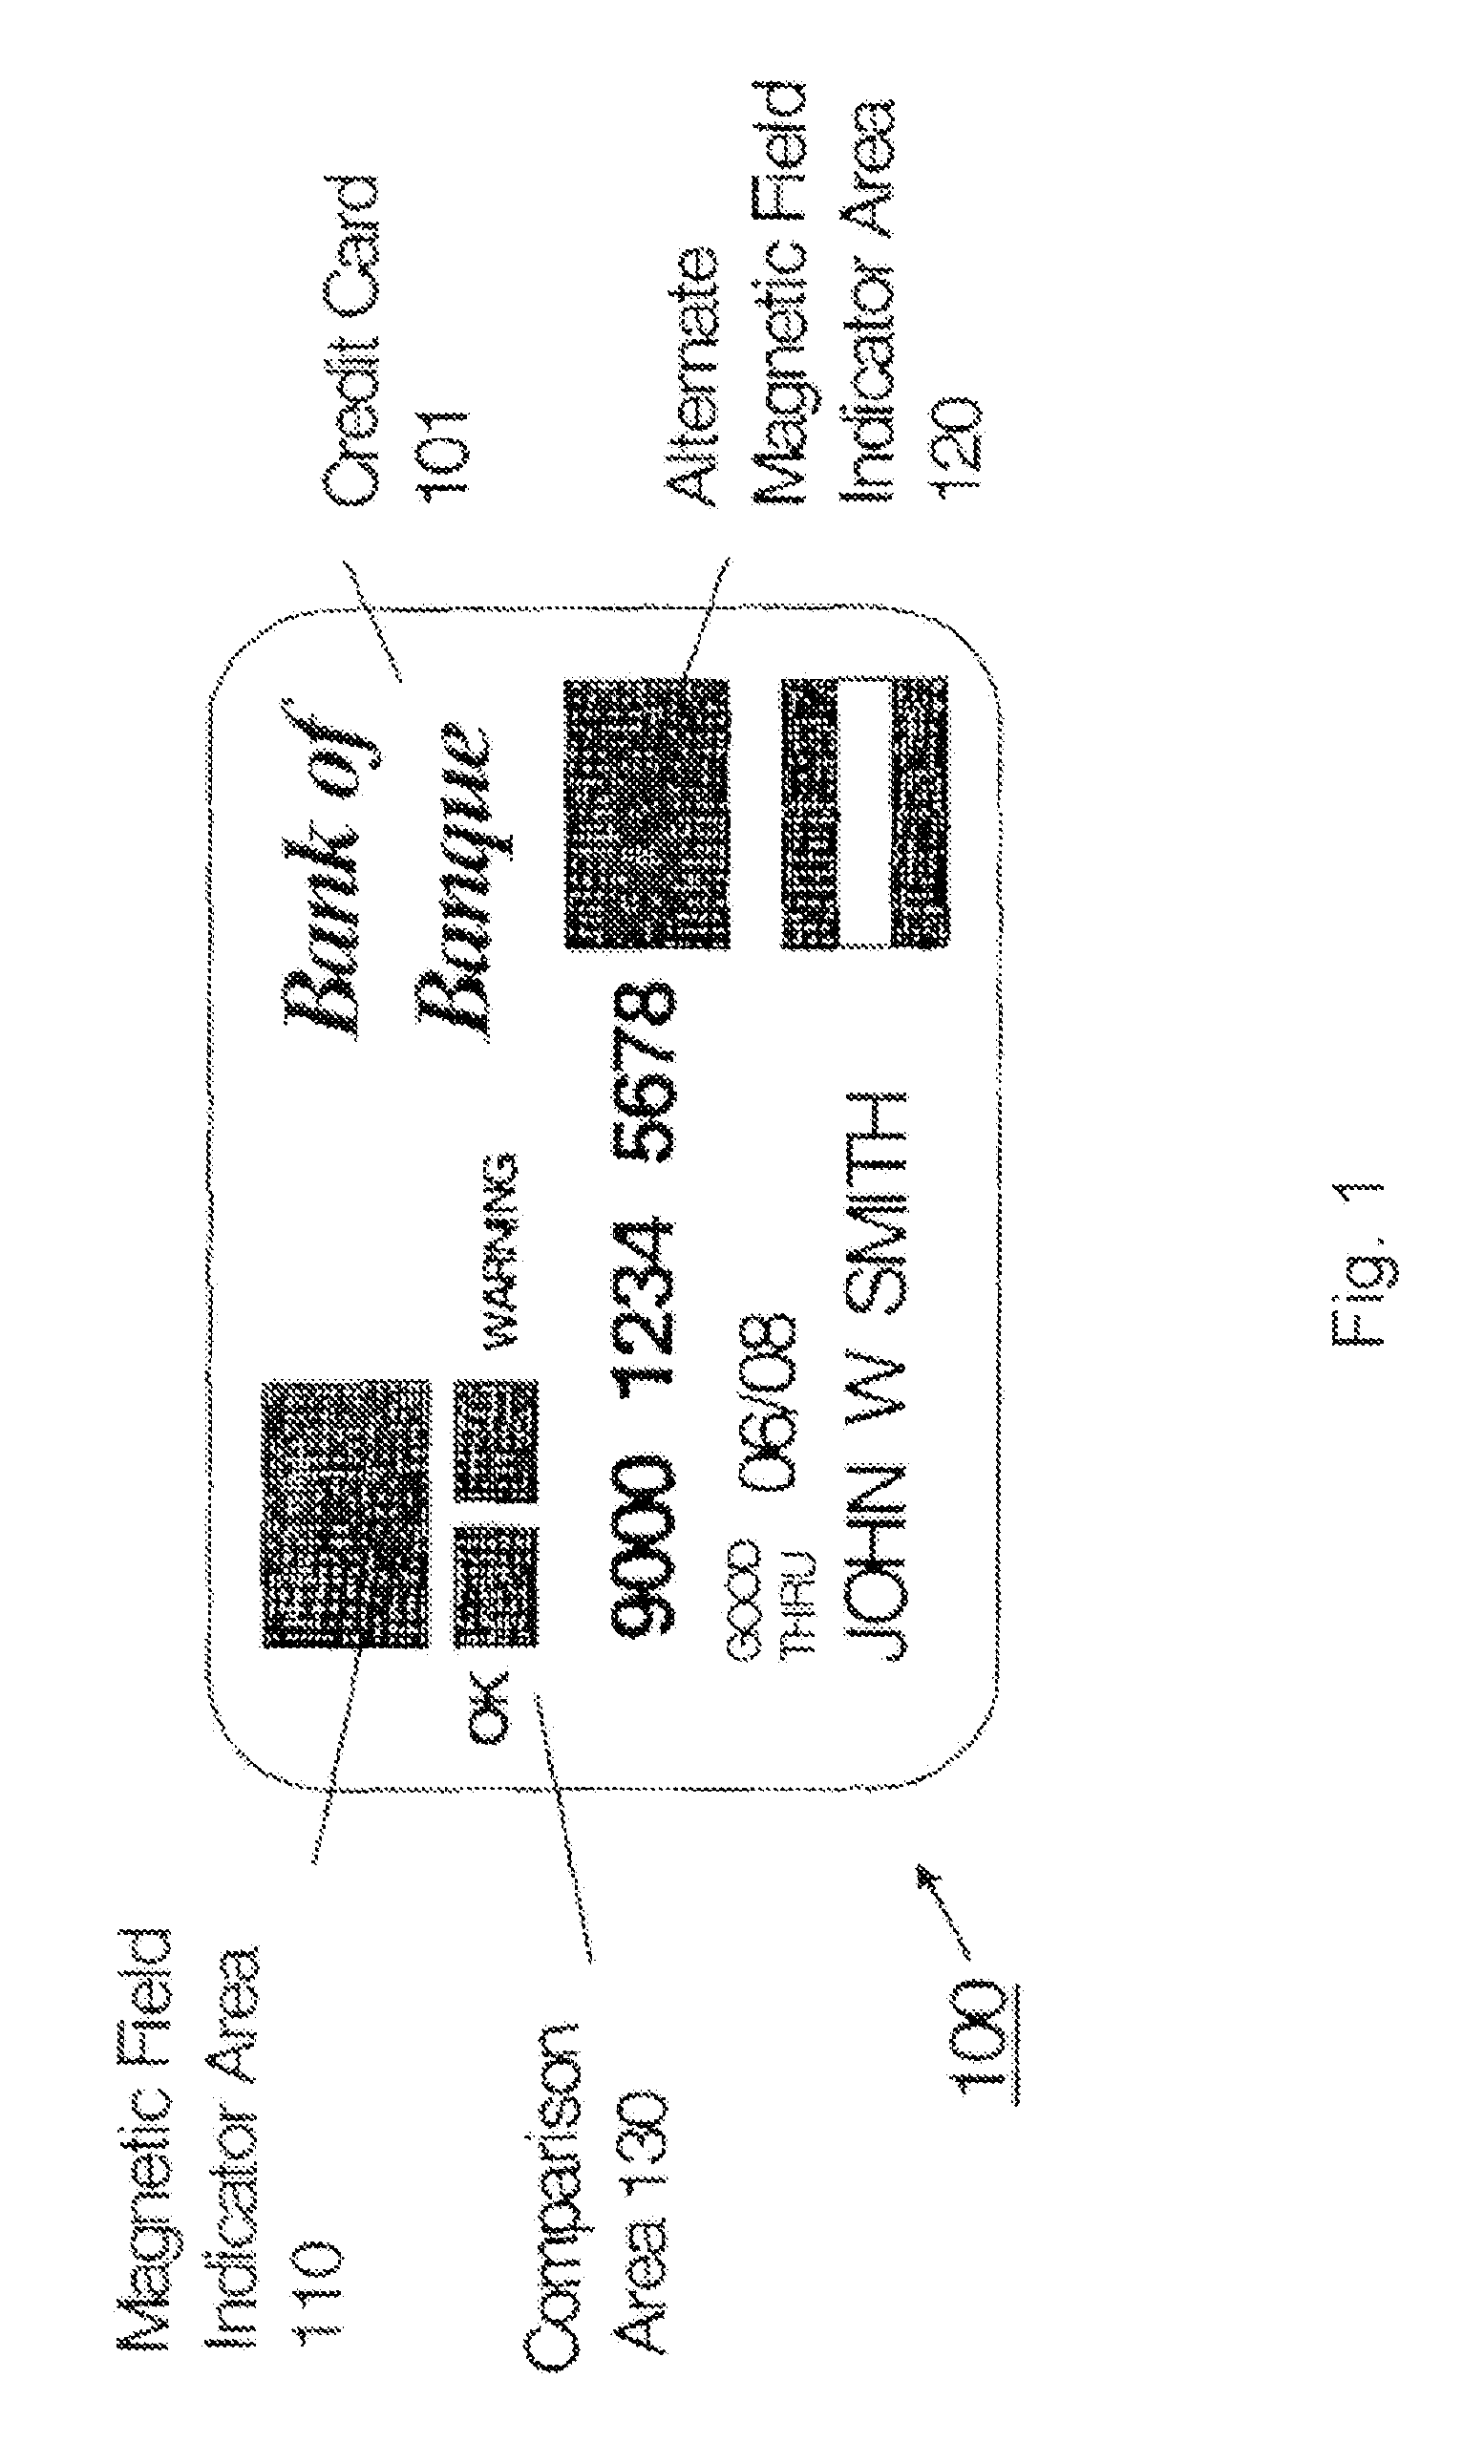 System and method for magnetic field exposure indication